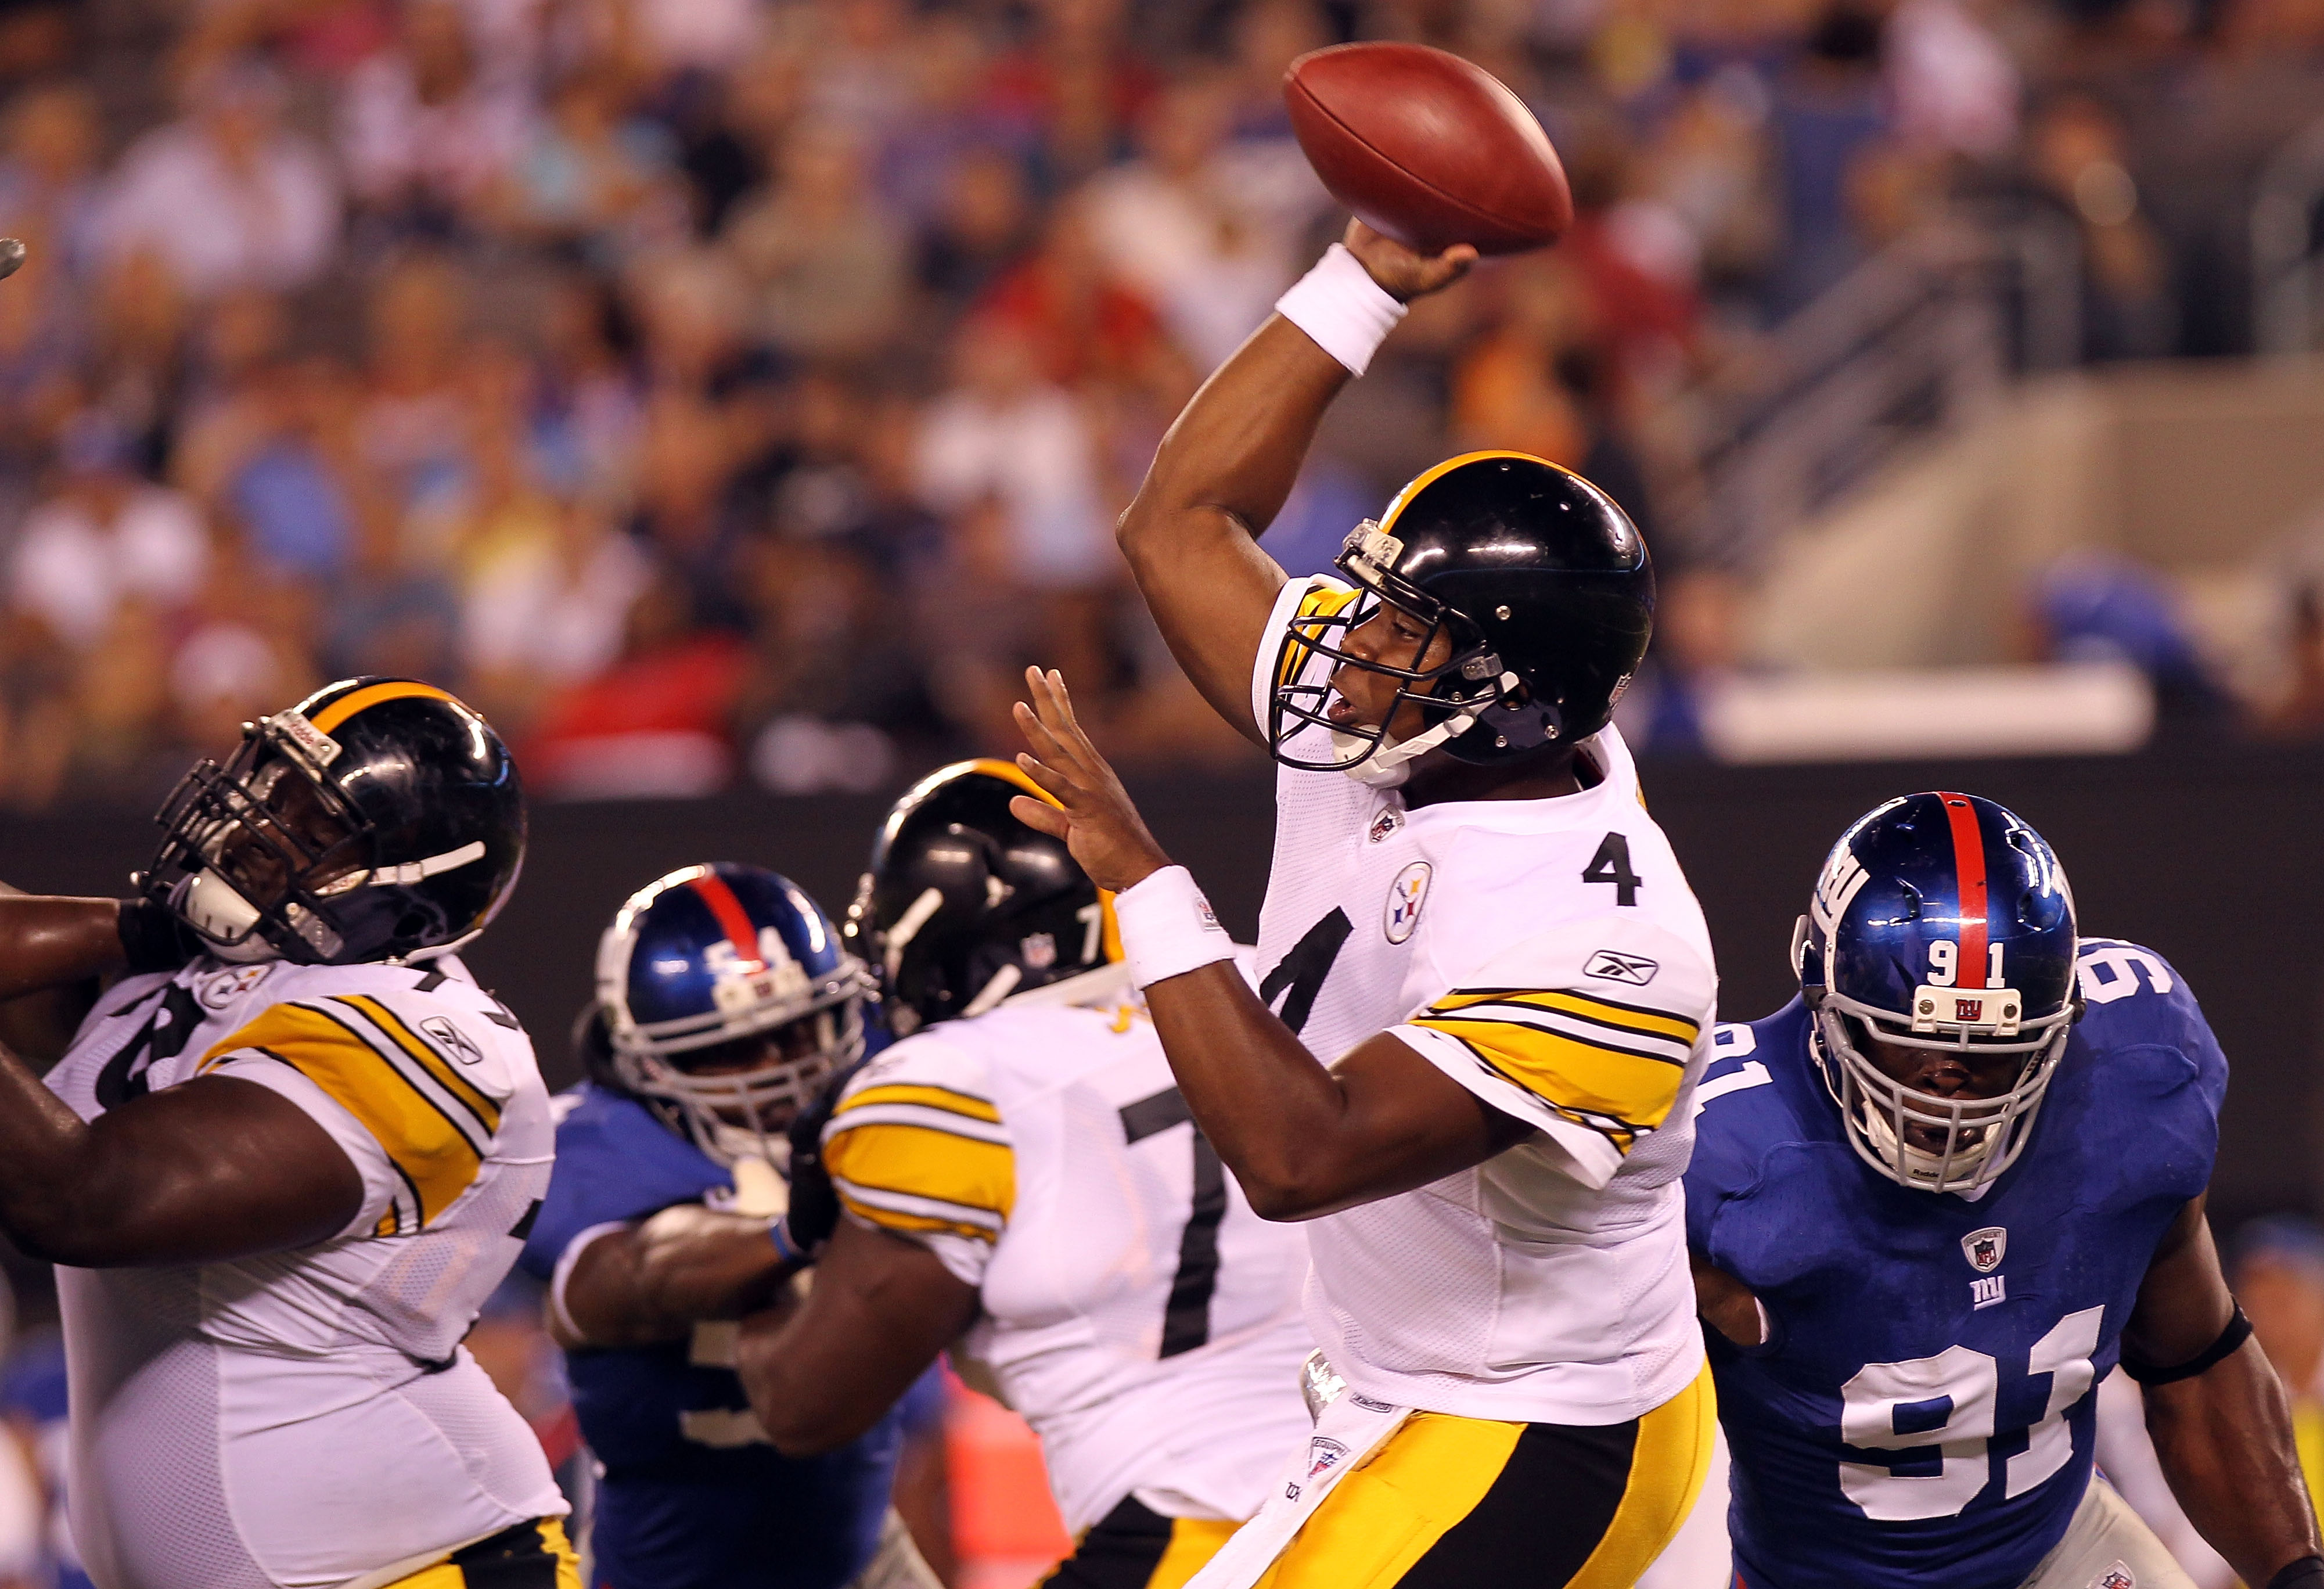 EAST RUTHERFORD, NJ - AUGUST 21:  Byron Leftwich #4 of the Pittsburgh Steelers passes against the New York Giants during their preseason game at New Meadowlands Stadium on August 21, 2010 in East Rutherford, New Jersey.  (Photo by Nick Laham/Getty Images)